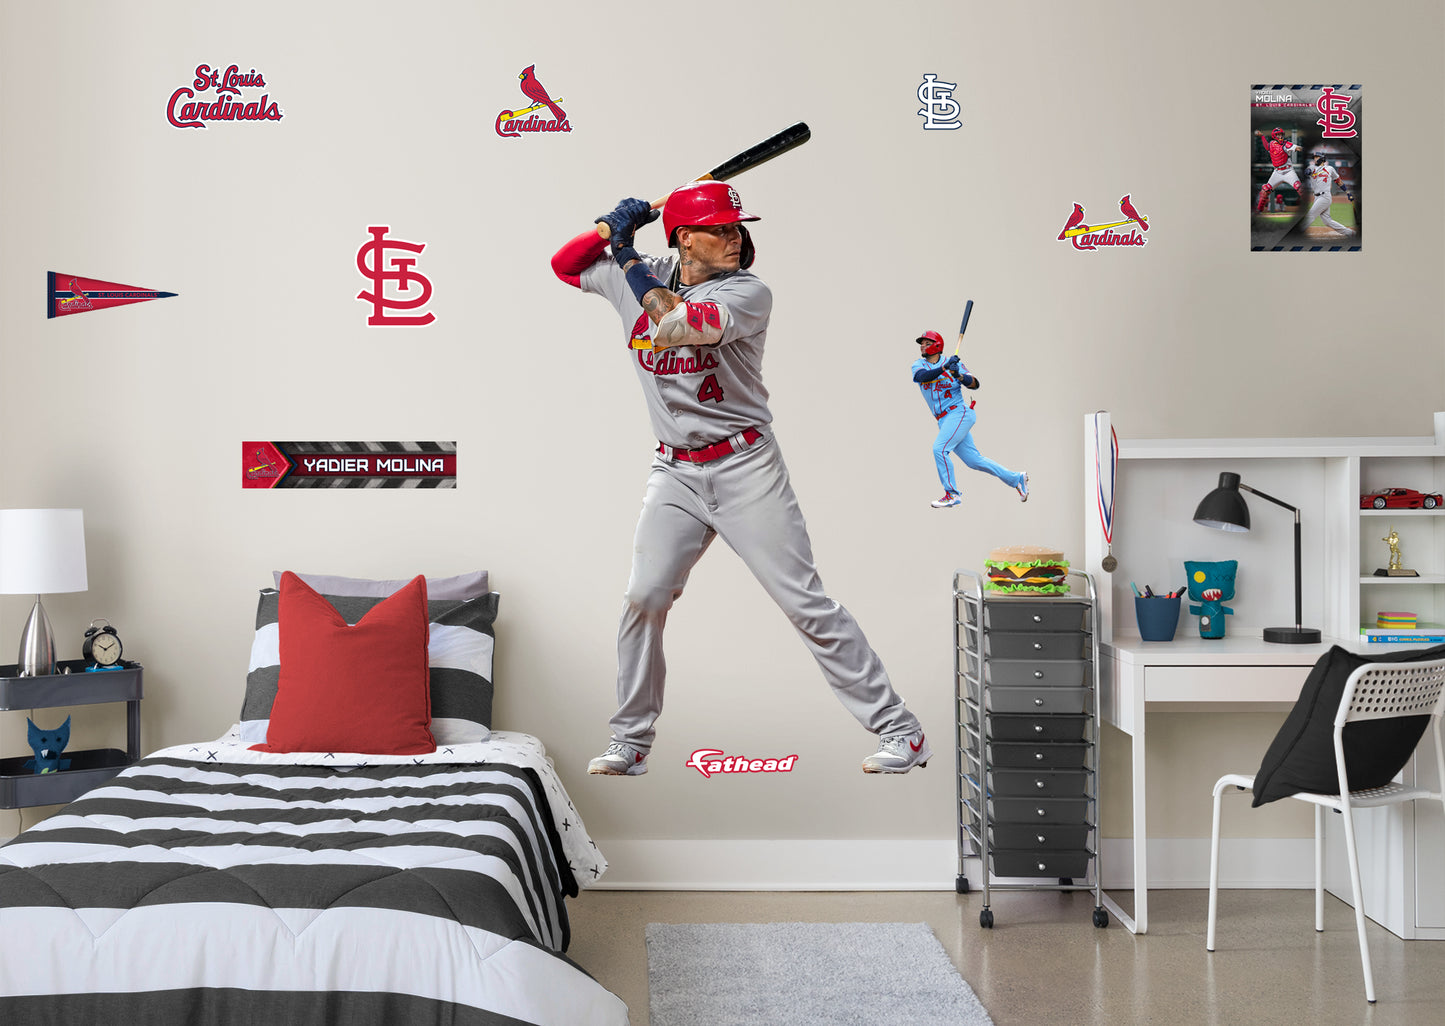 Lids Yadier Molina St. Louis Cardinals Fathead Giant Removable Wall Mural